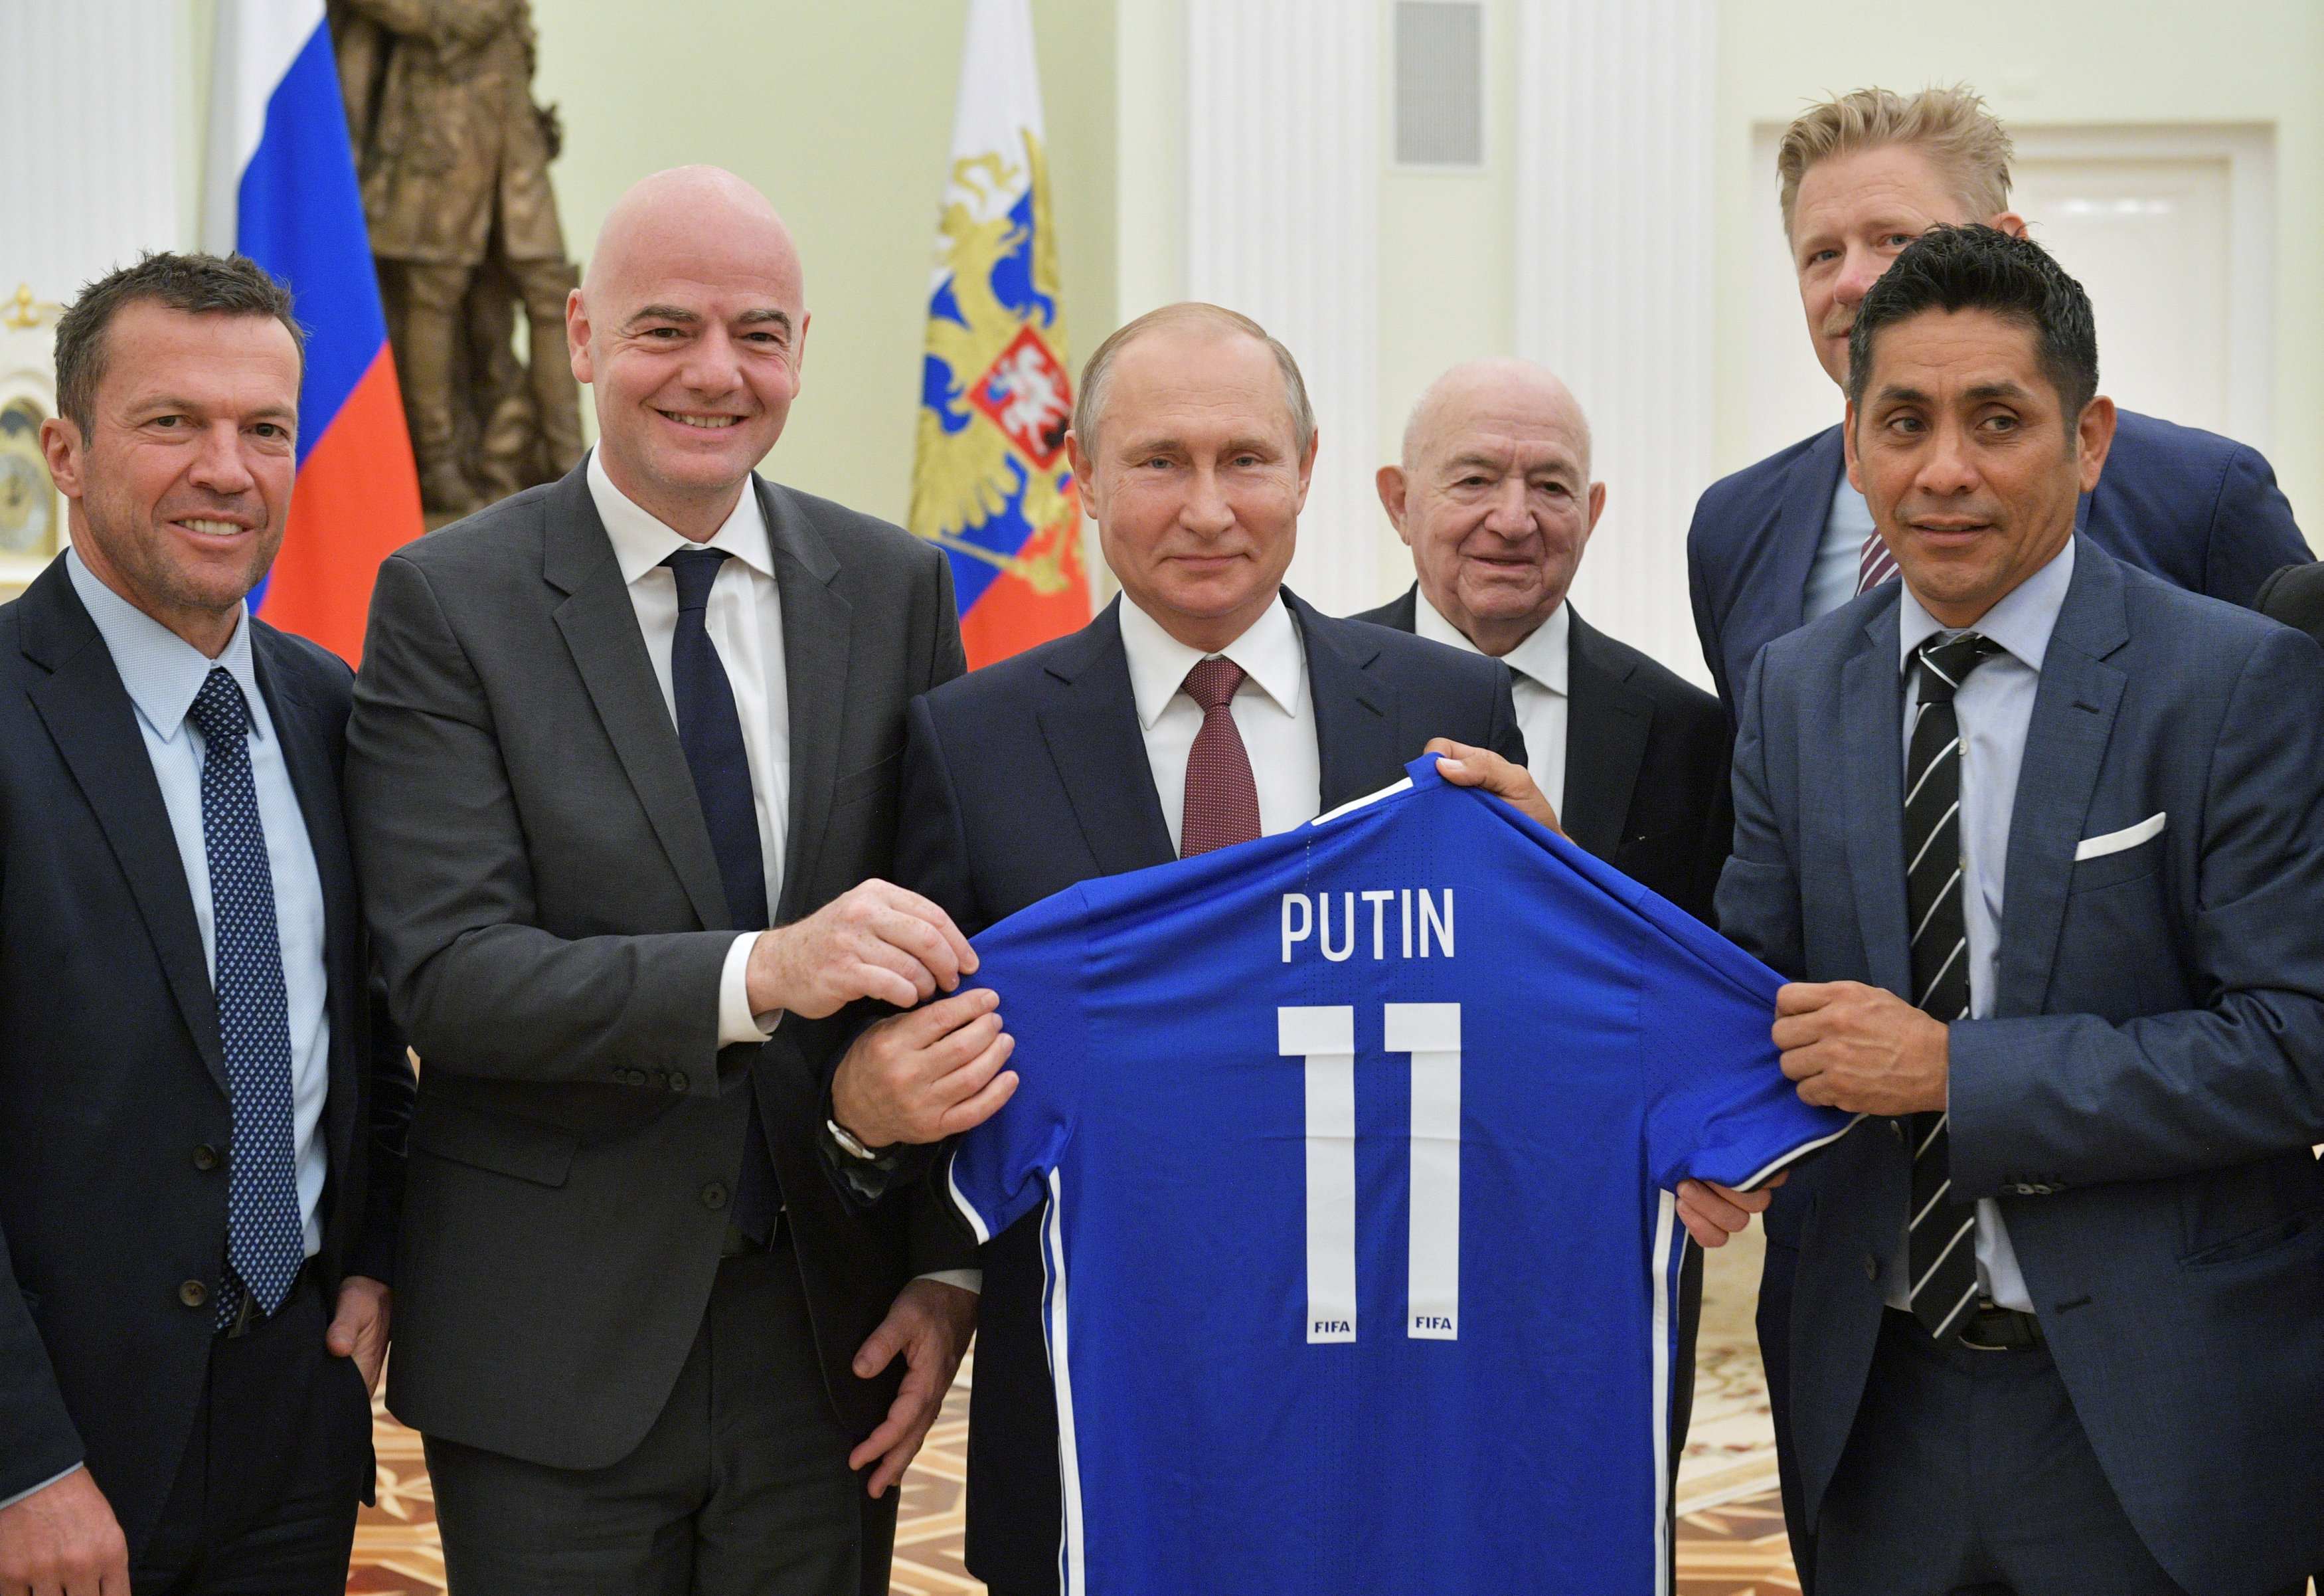 Russia's President Vladimir Putin (C) poses for a picture with (L-R) former player of team Germany Lothar Matthaeus, FIFA President Gianni Infantino, First Vice President of the Russian Football Union Nikita Simonyan, former player of team Denmark Peter Schmeichel and former player of team Mexico Jorge Campos during a meeting at the Kremlin in Moscow, Russia July 6, 2018. Photo: Reuters